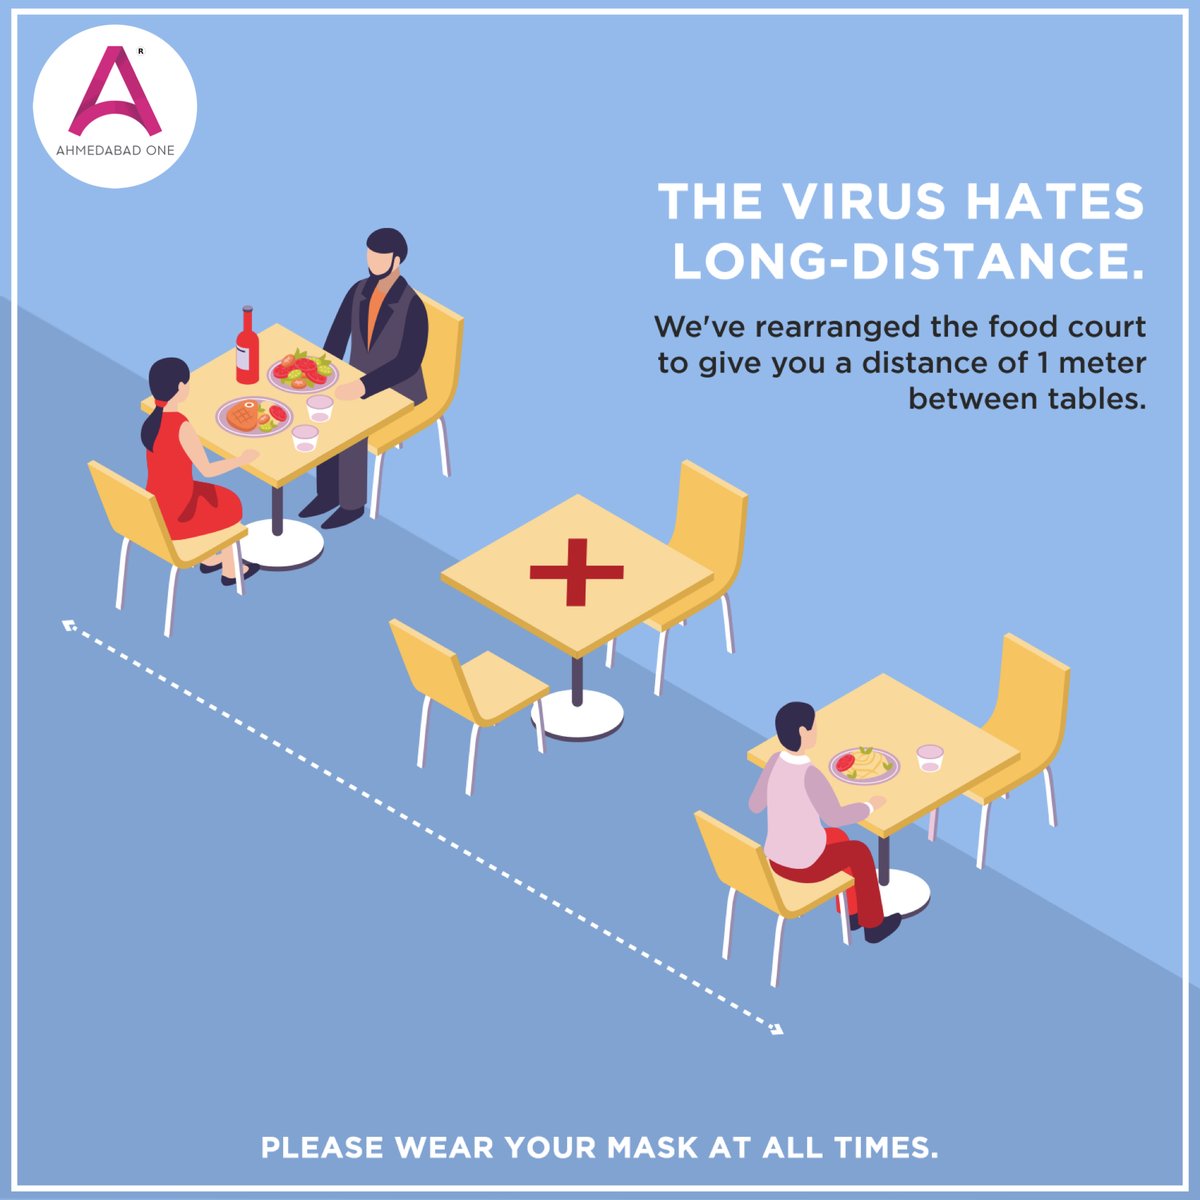 We'll go the extra-mile for your well-being. We are following social distancing norms and taking all necessary measures to keep you safe at #AhmedabadOne Mall. When are you visiting us? #IndianMalls #NexusMalls #MallsInAmdavad #Dinein #socialdistancing #staysafe